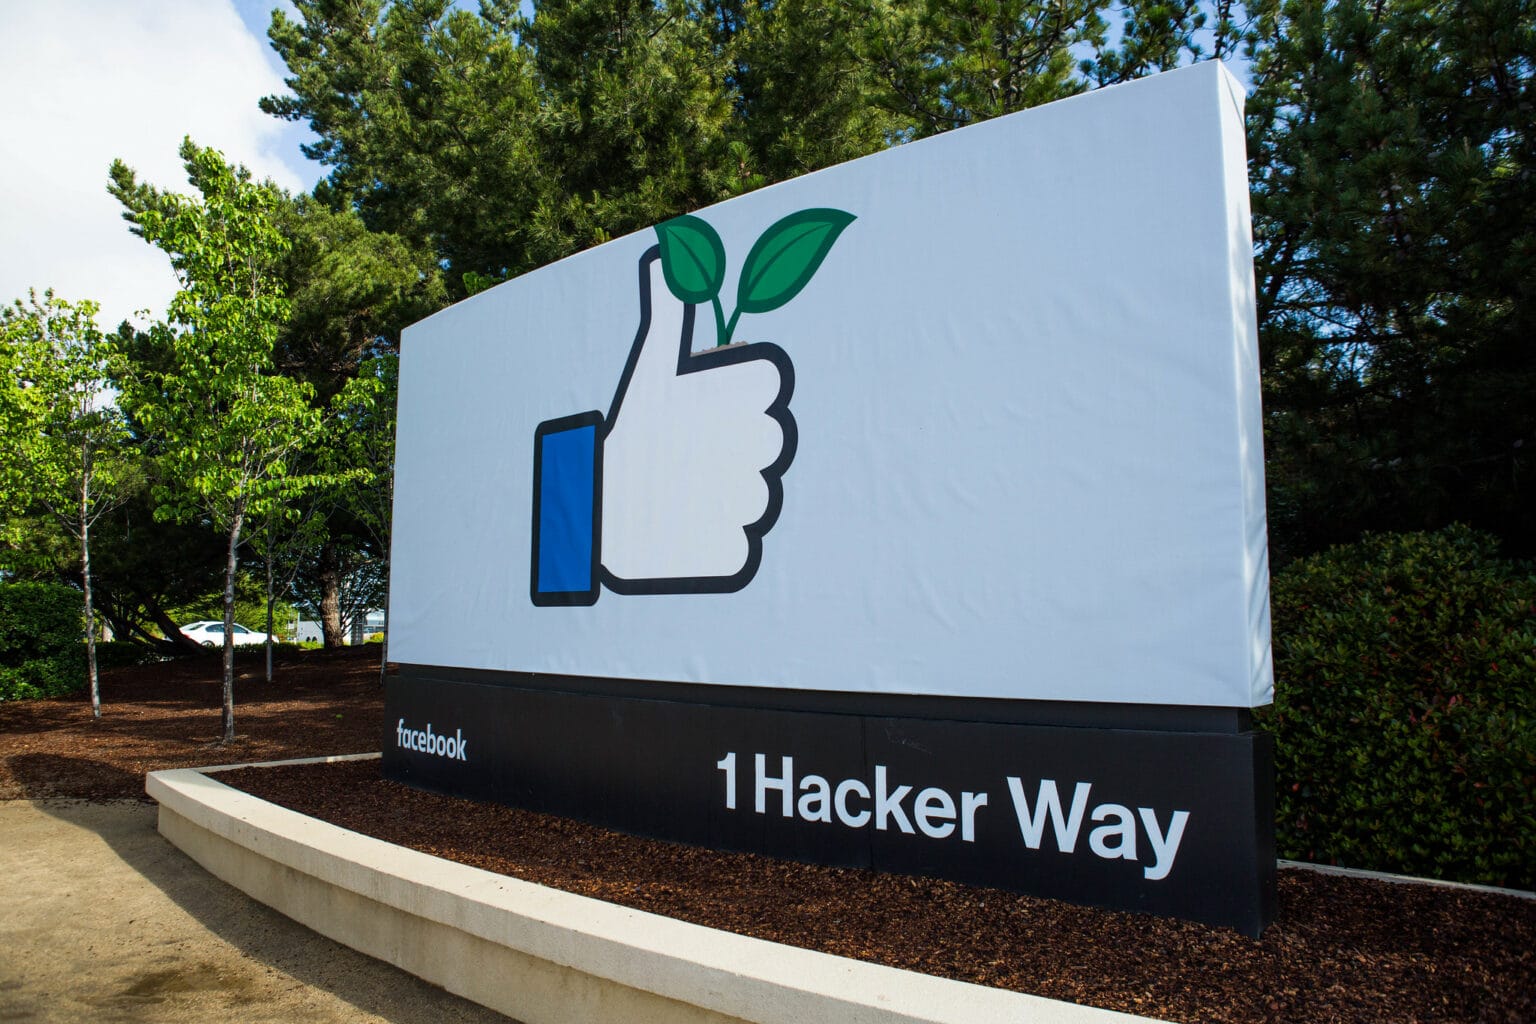 A sign at Facebook's headquarters shows the site's "thumbs up" image holding a leafy green plant, and the words 1 Hacker Way.